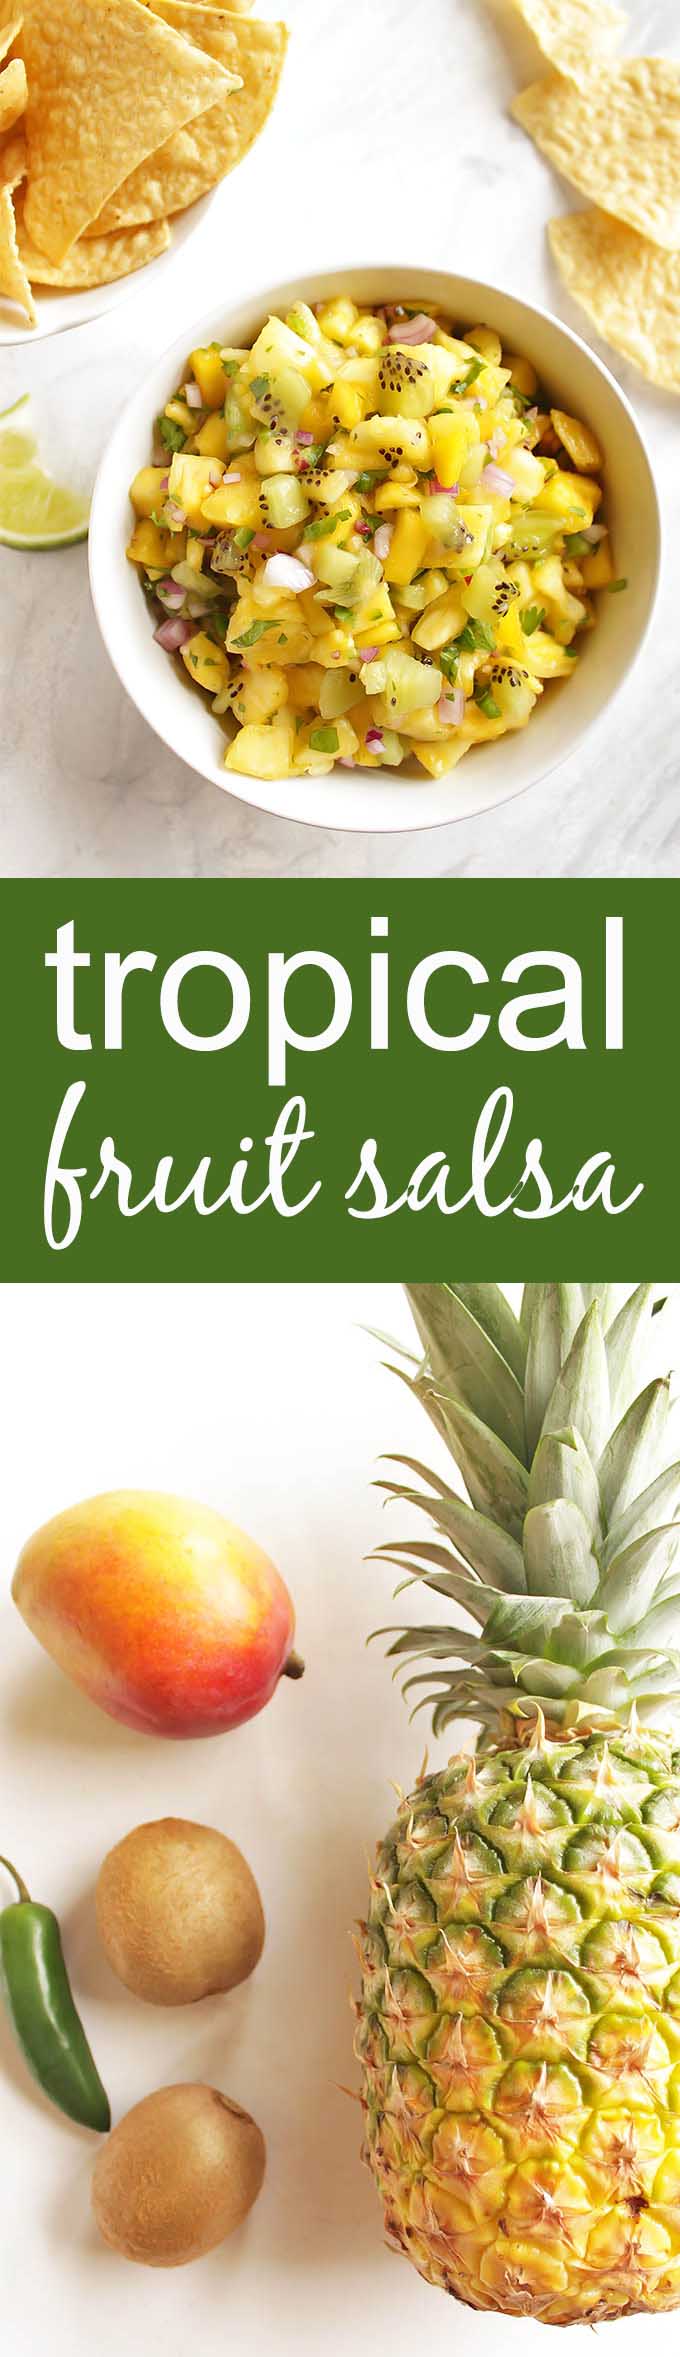 Tropical Fruit Salsa - A quick and flavorful fruit salsa that's a lot of sweet and a little savory. This recipe only requires 7 ingredients and 10 minutes to make! It goes great with tortilla chips for dipping or is delicious added on top of plain chicken, fish, or pork. It is even good on fish tacos! Gluten Free/Vegan/Vegetarian | robustrecipes.com